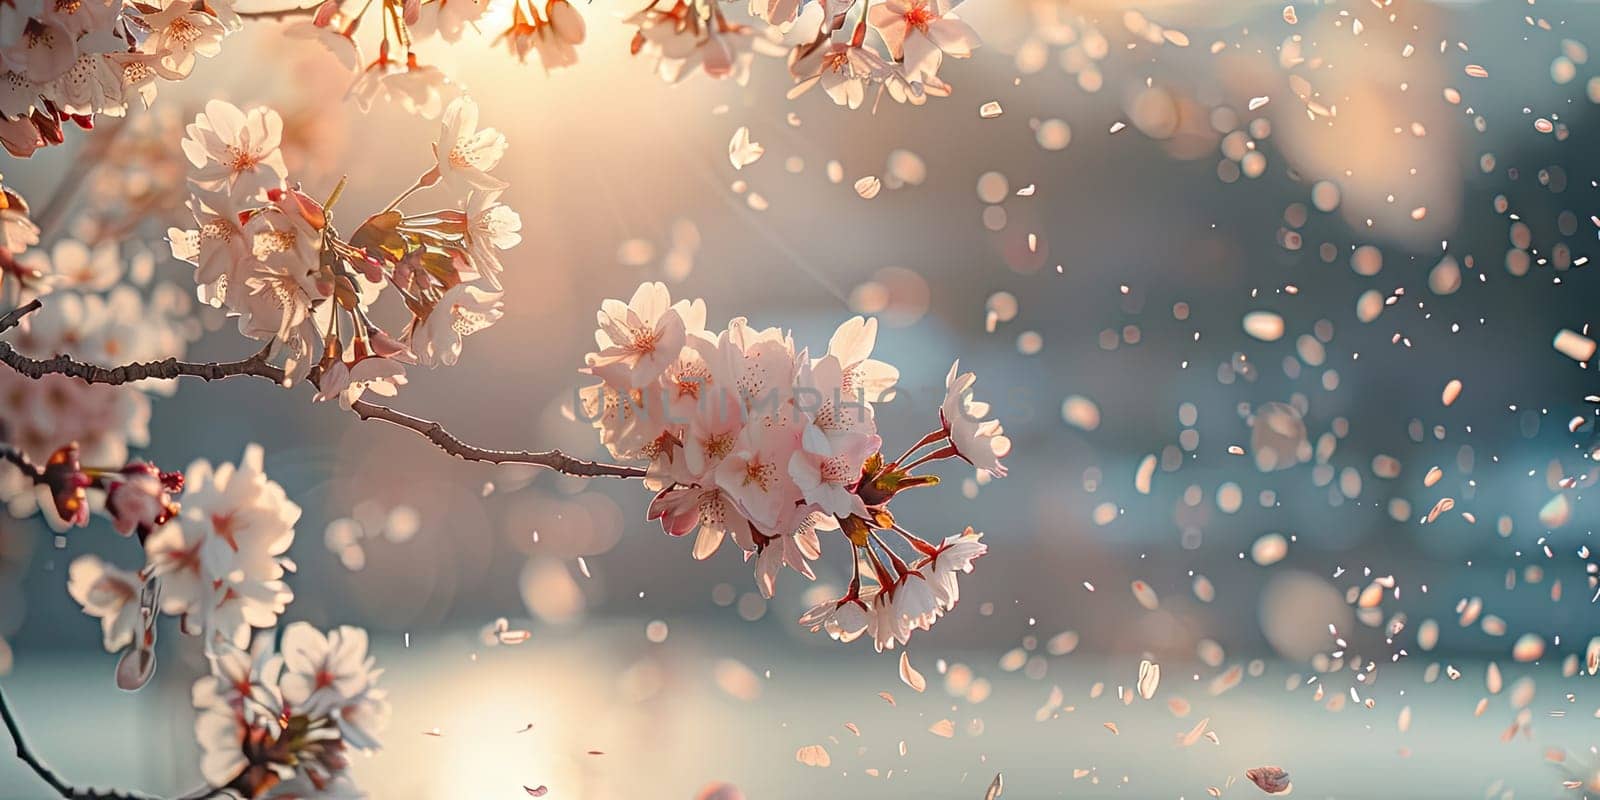 Cherry blossom branch in full bloom with petals in the air, warm sunlight backlighting delicate pink flowers against soft focus background. Floral sakura background. Ai generation. by Lunnica